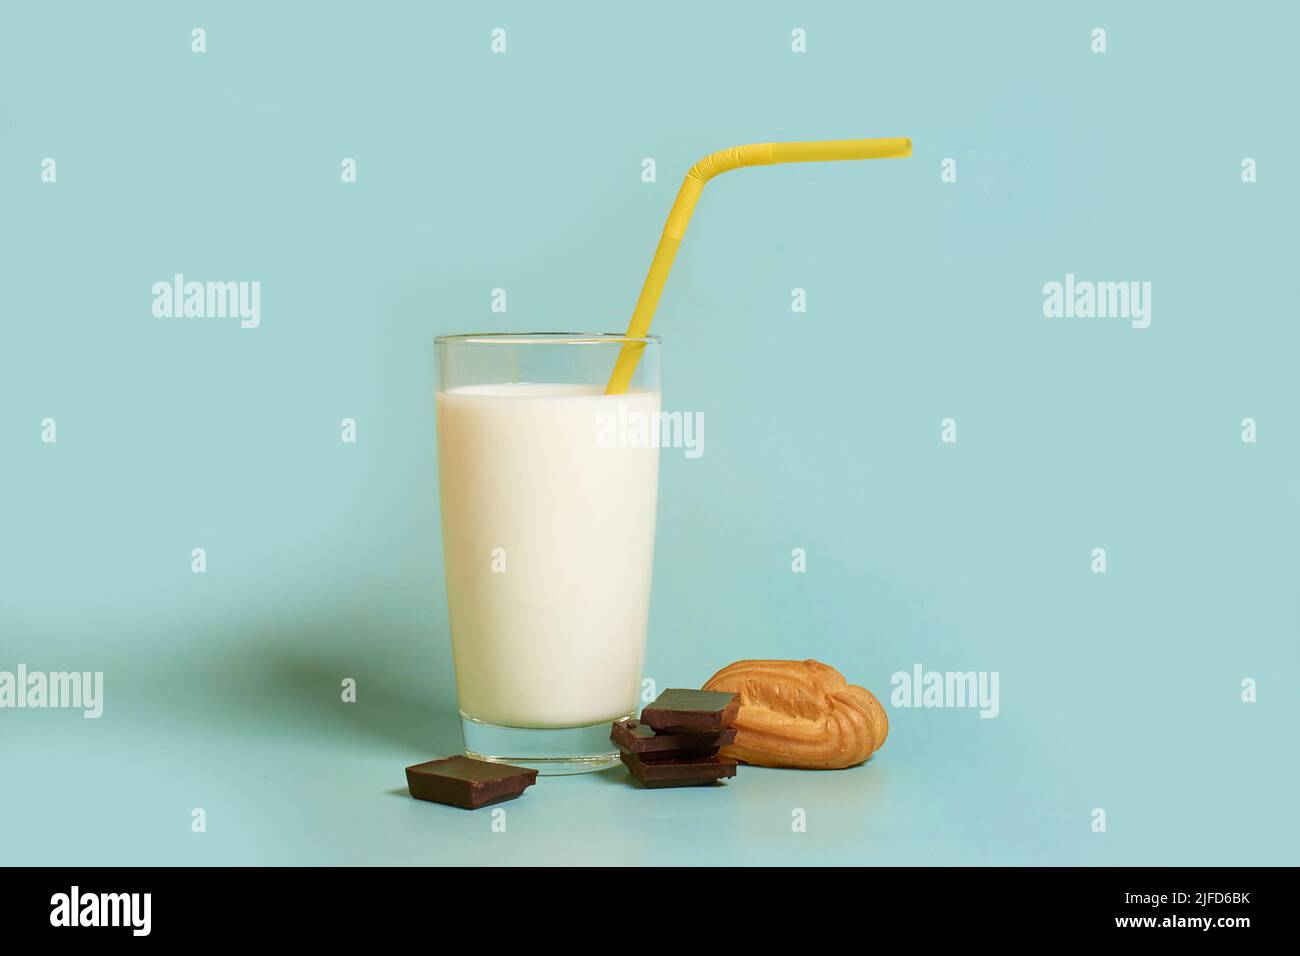 A glass of milk, plastic tube, a cake and pieces of dark chocolate  Stock Photo